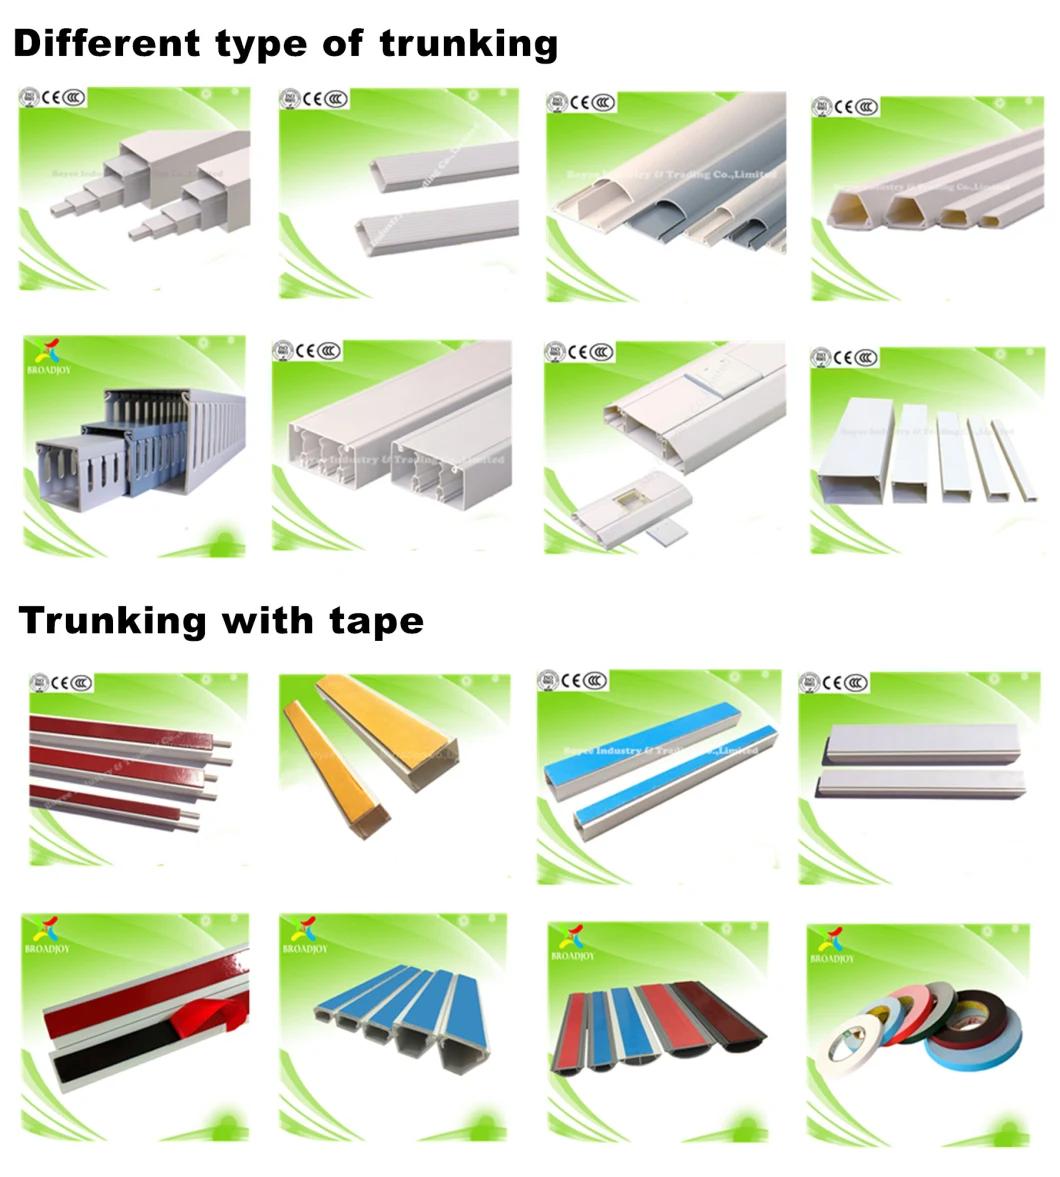 PVC Trunking with Blue Tape / Electrical Cable Trunking / Trunking with Adhesive